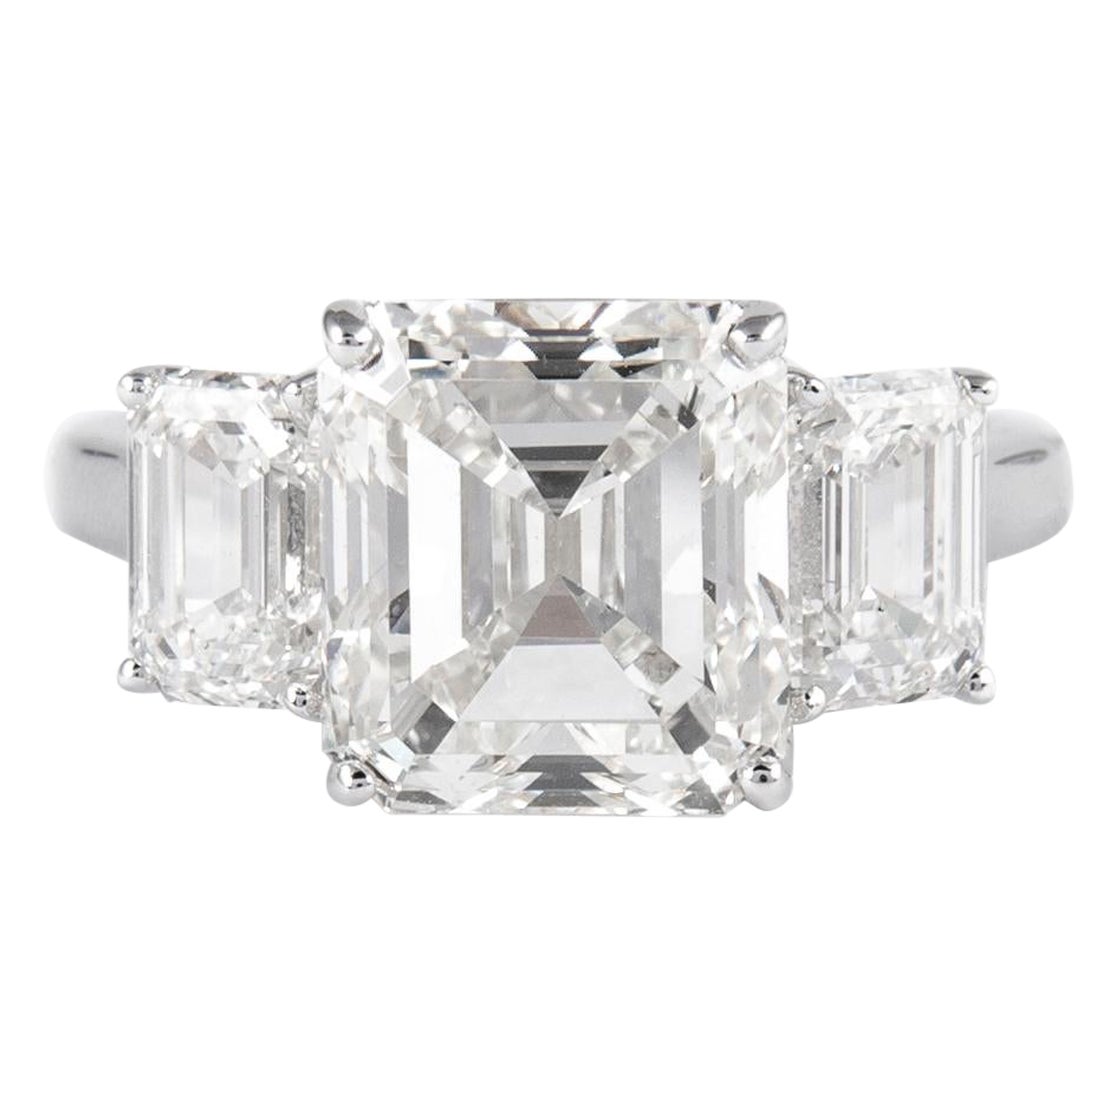 A 3.31ct Asscher Cut Diamond Ring With Graduated Trapezoid Shoulders By ...